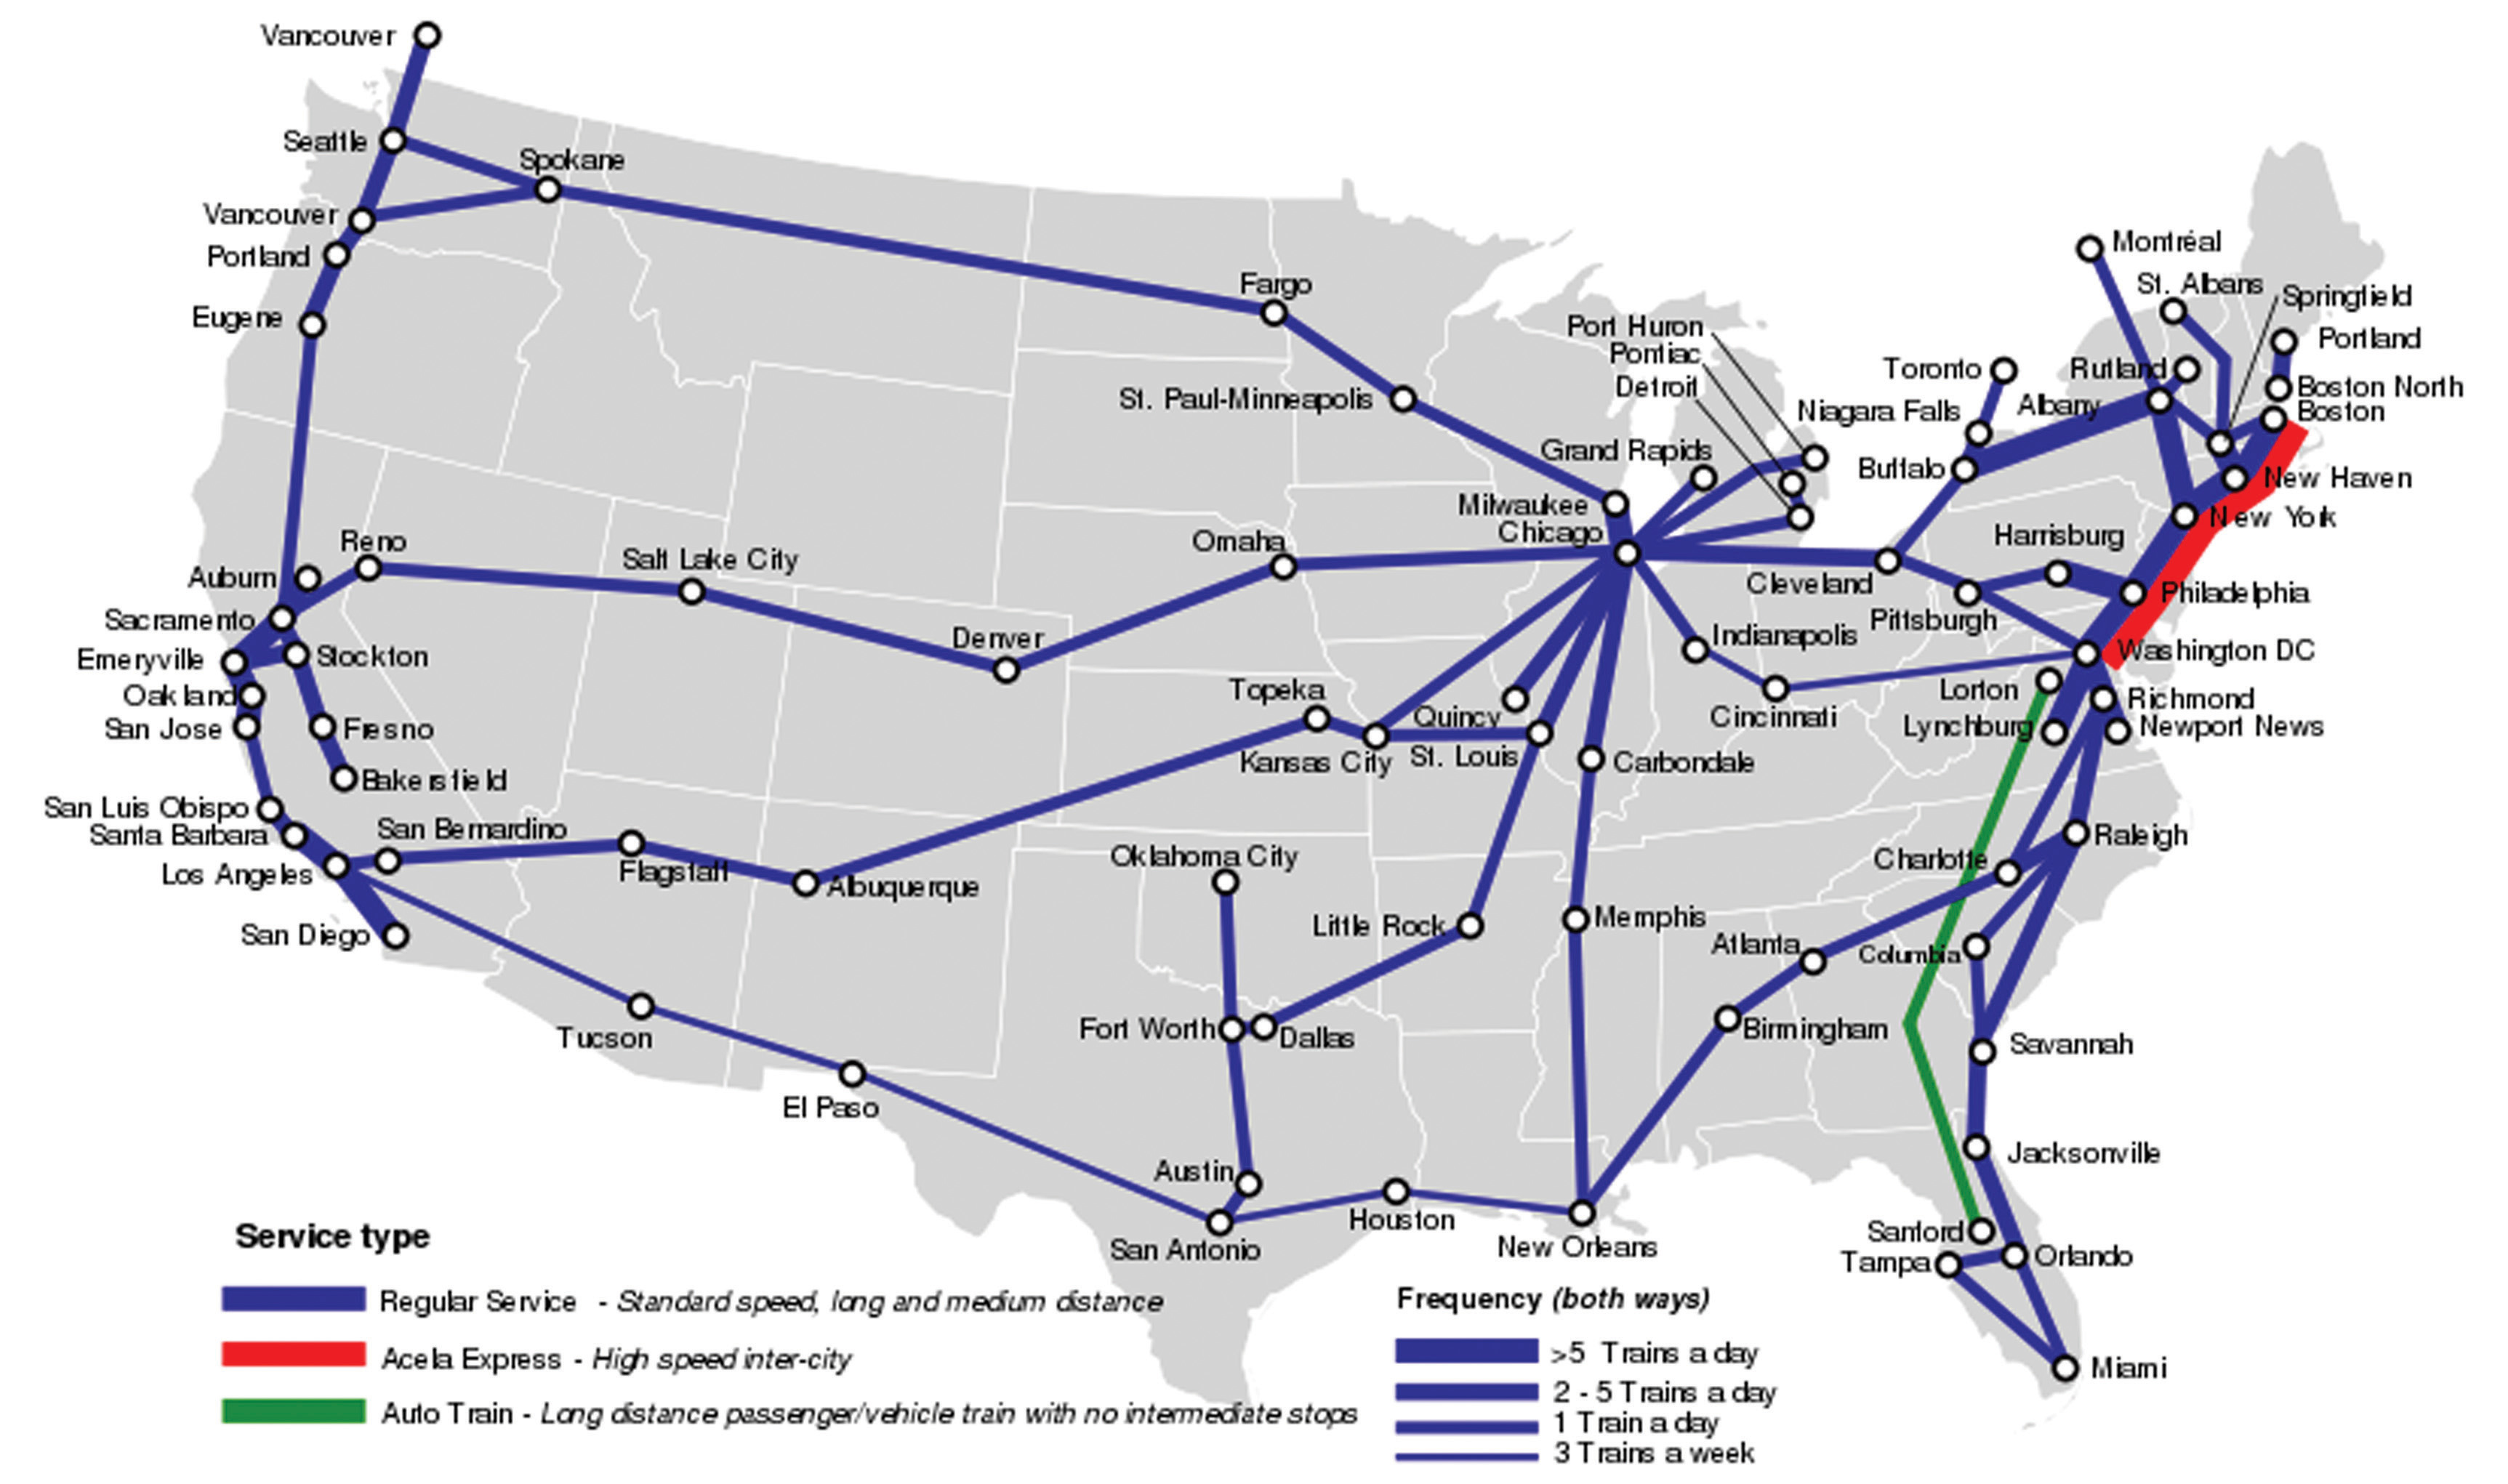 A map of the Amtrak's route